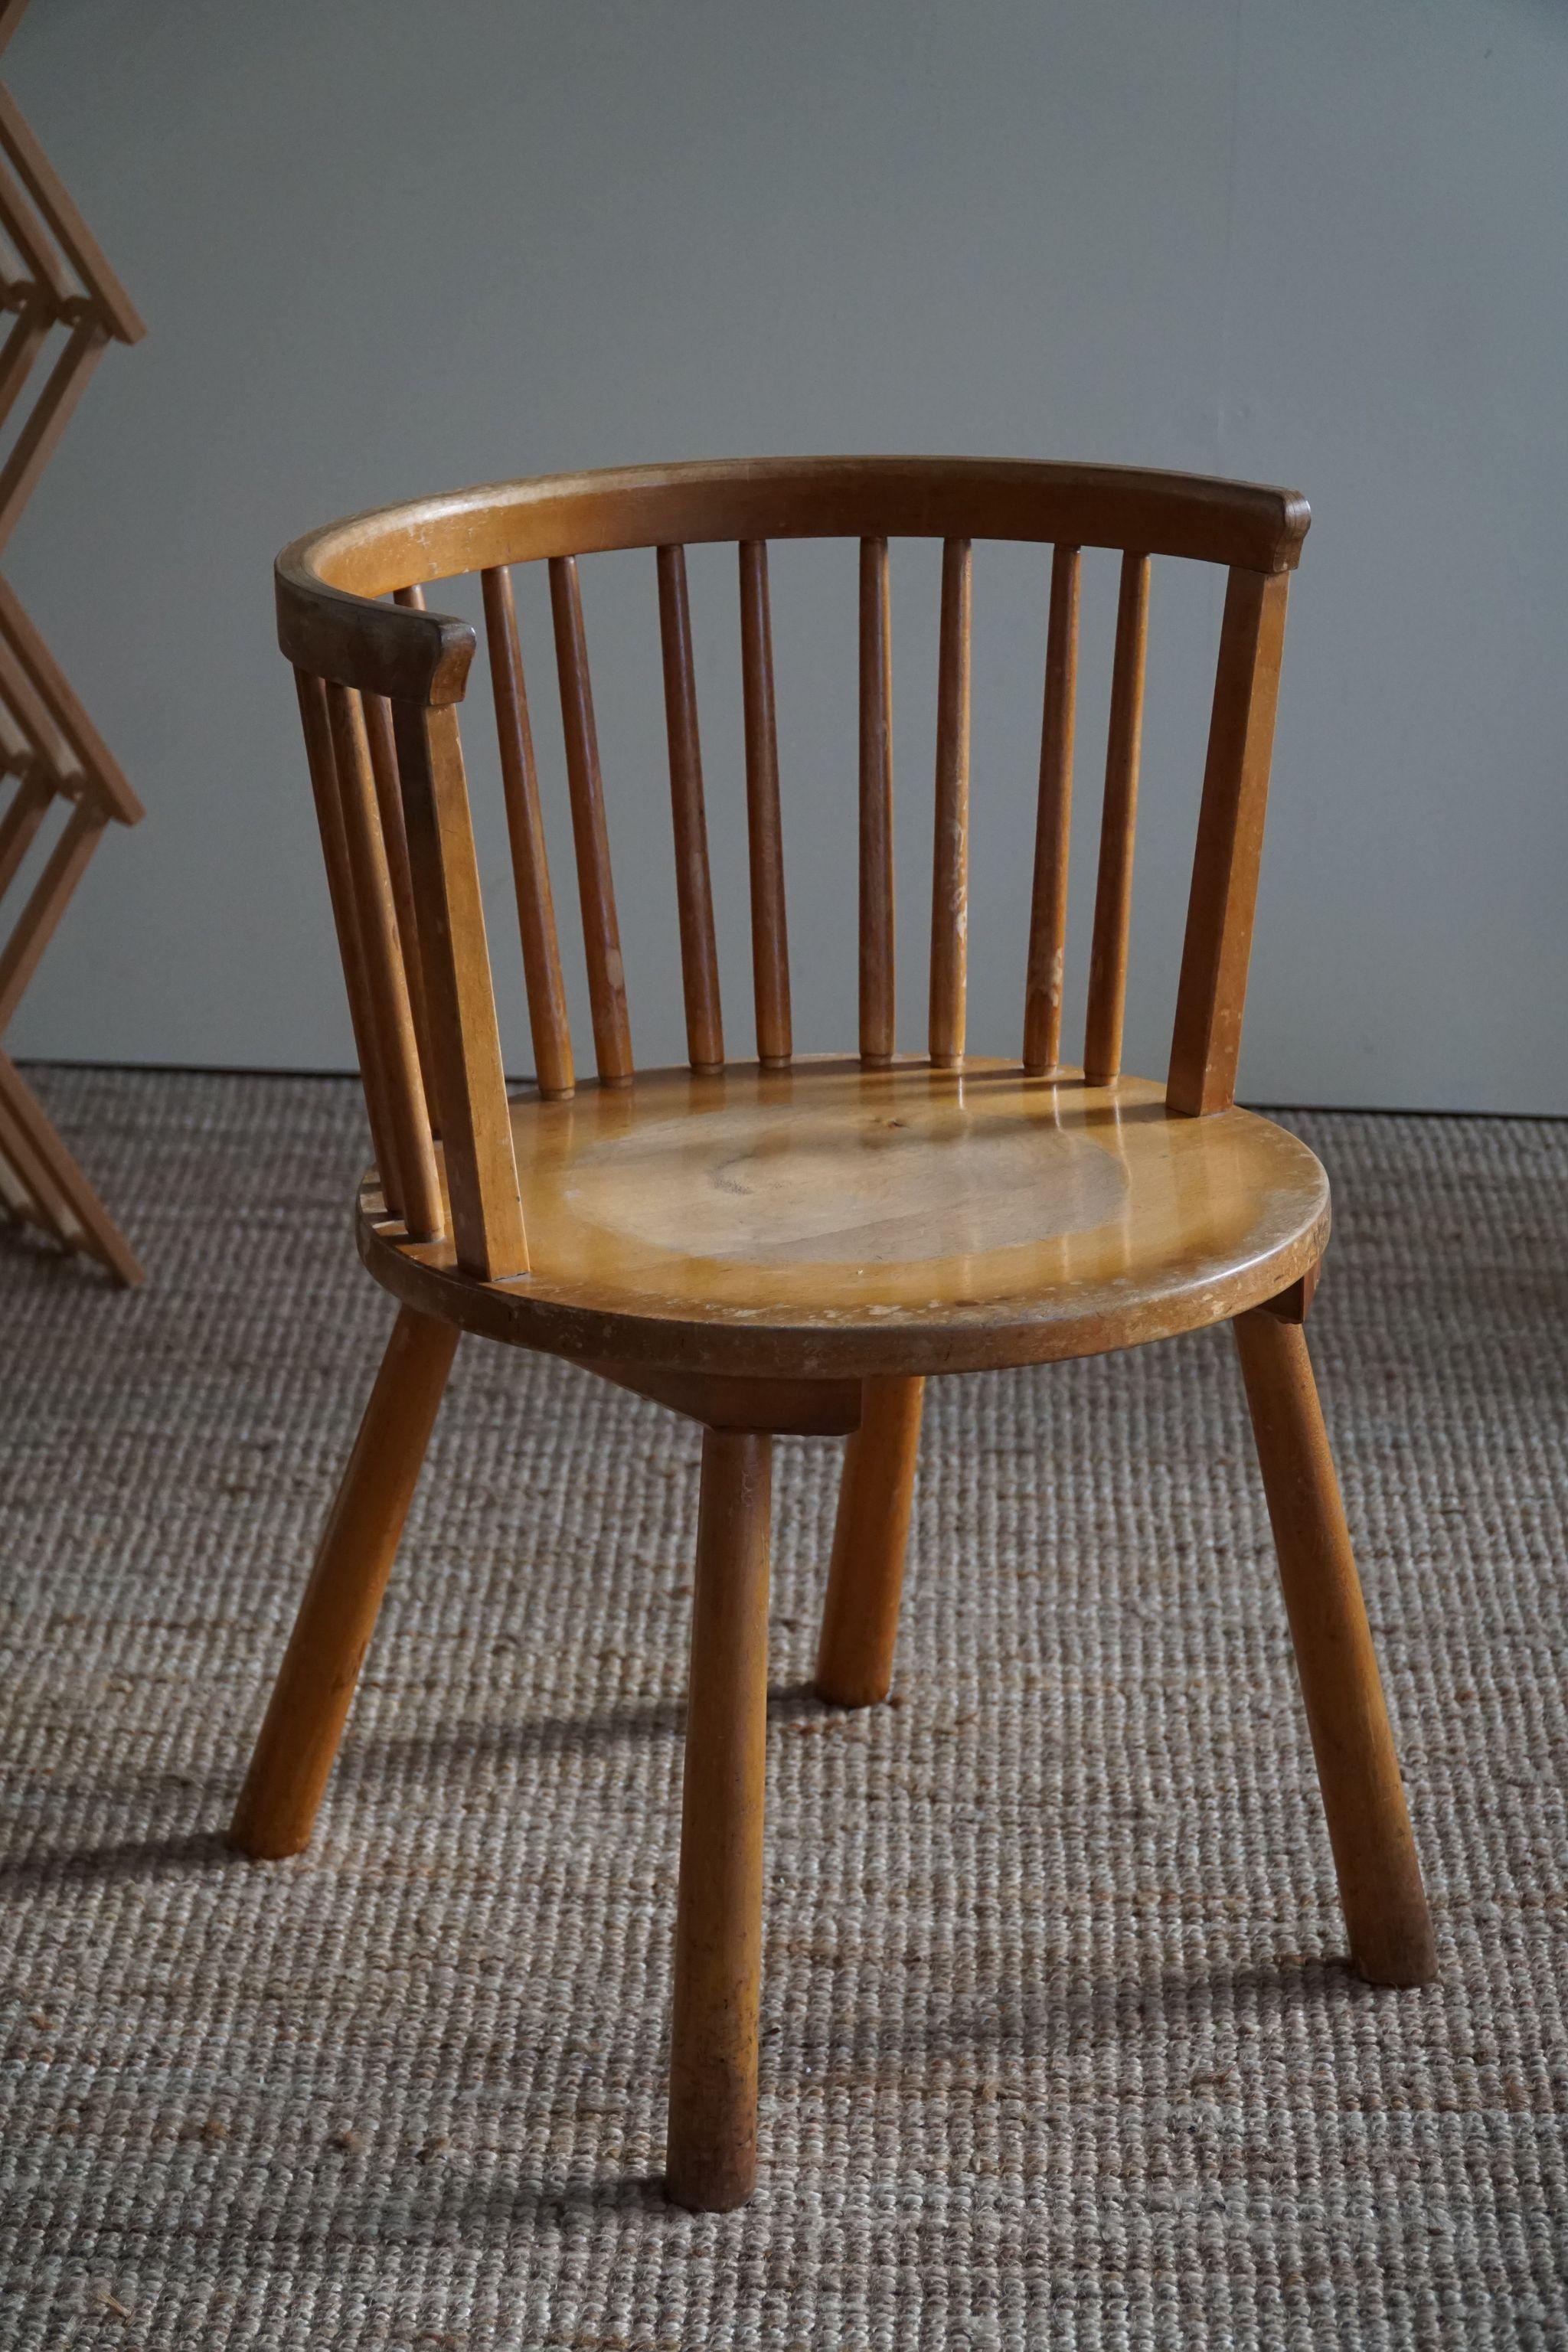 Swedish Modern Armchair in the Style of Axel Einar Hjorth, 1930s For Sale 3